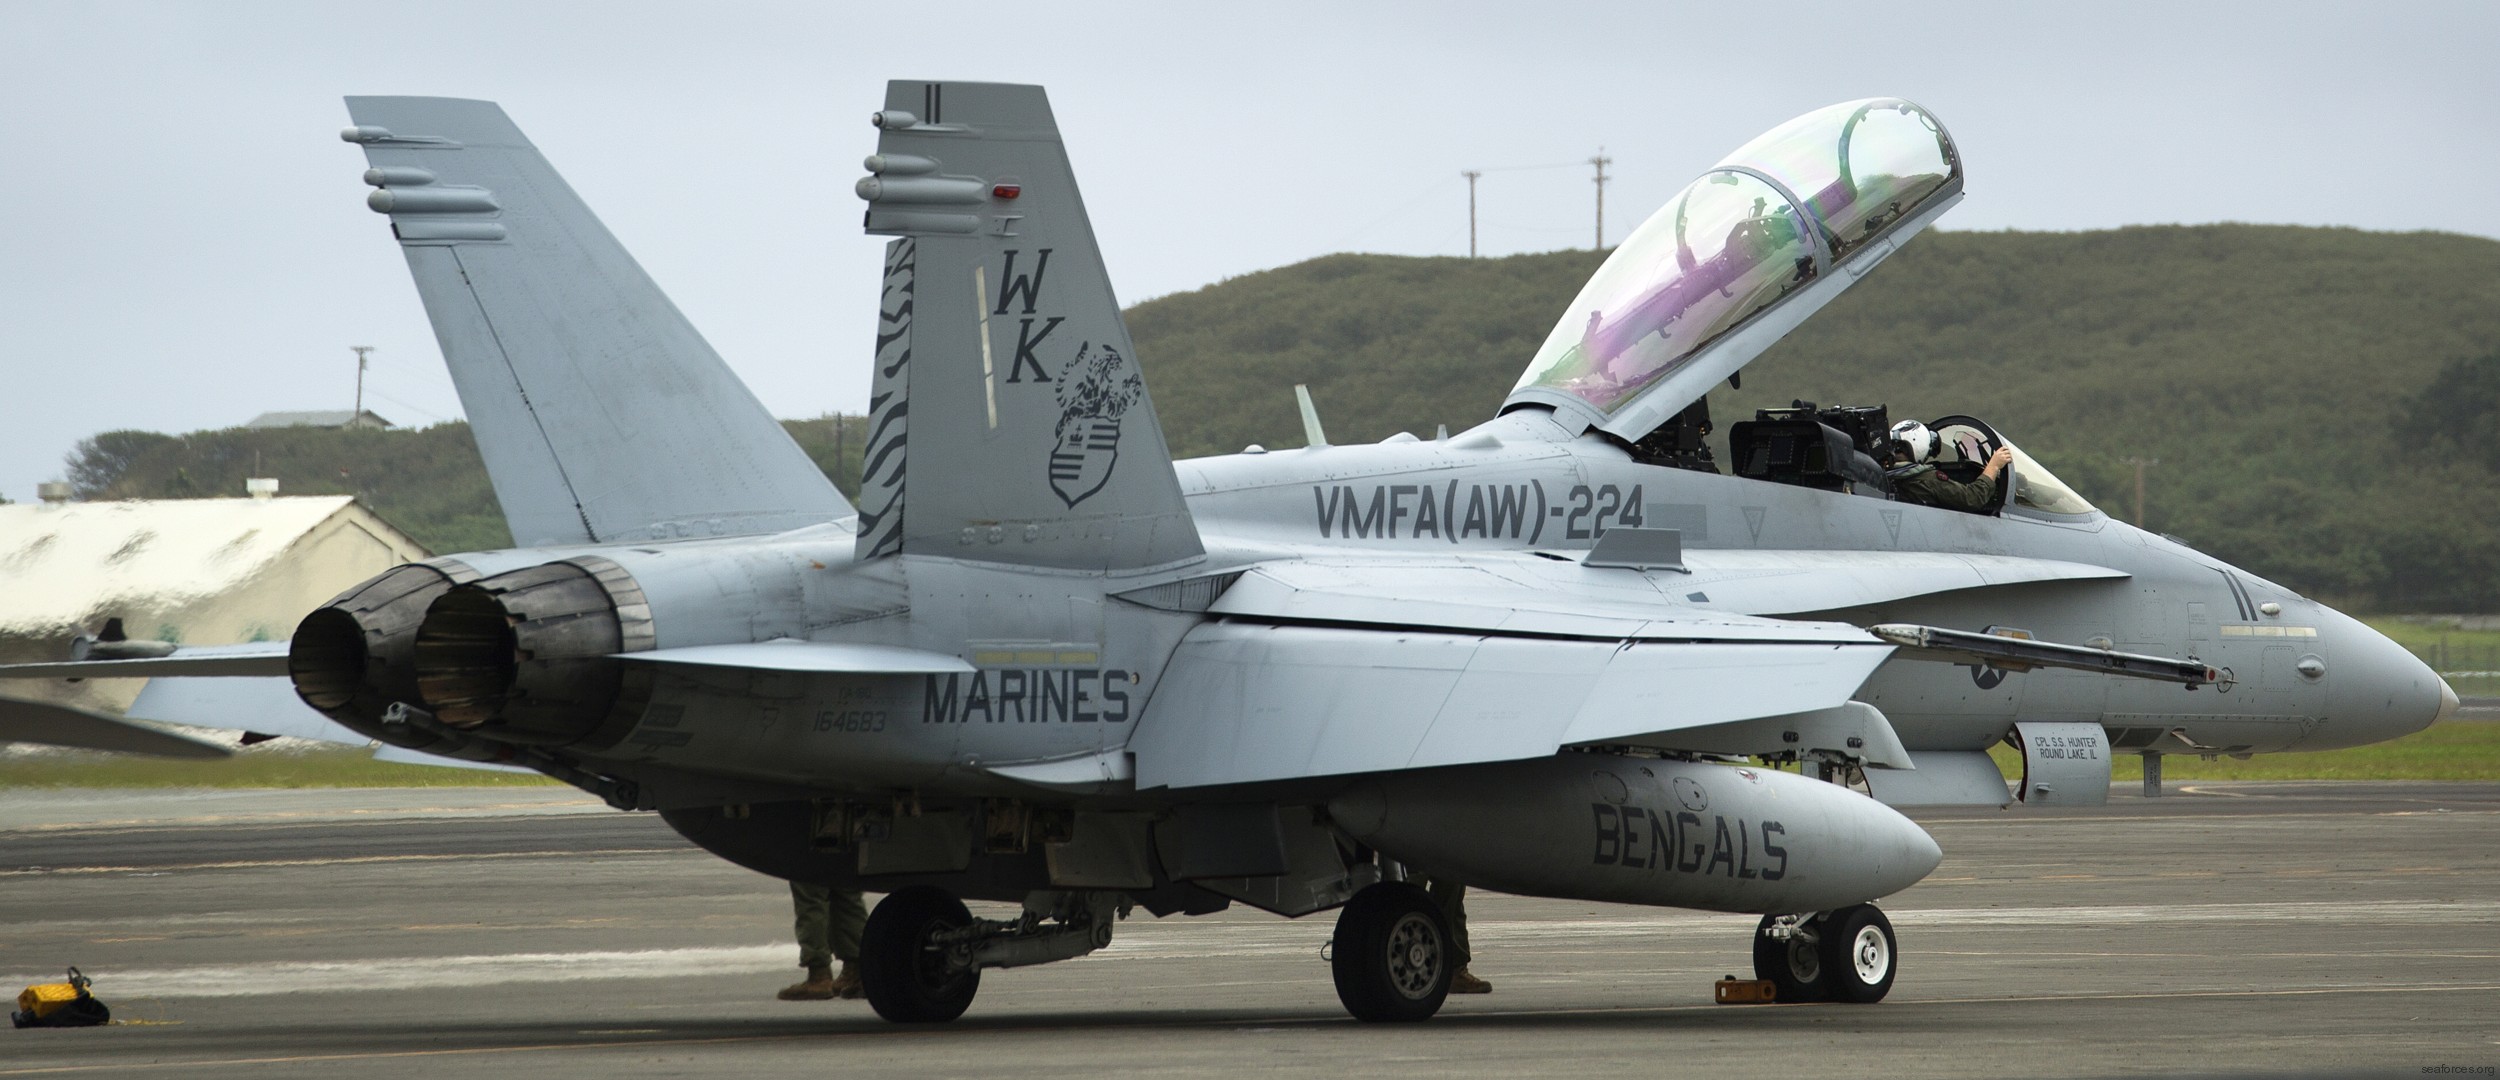 vmfa(aw)-224 bengals marine fighter attack squadron usmc f/a-18d hornet 18 exercise lava viper mcas kaneohe bay hawaii